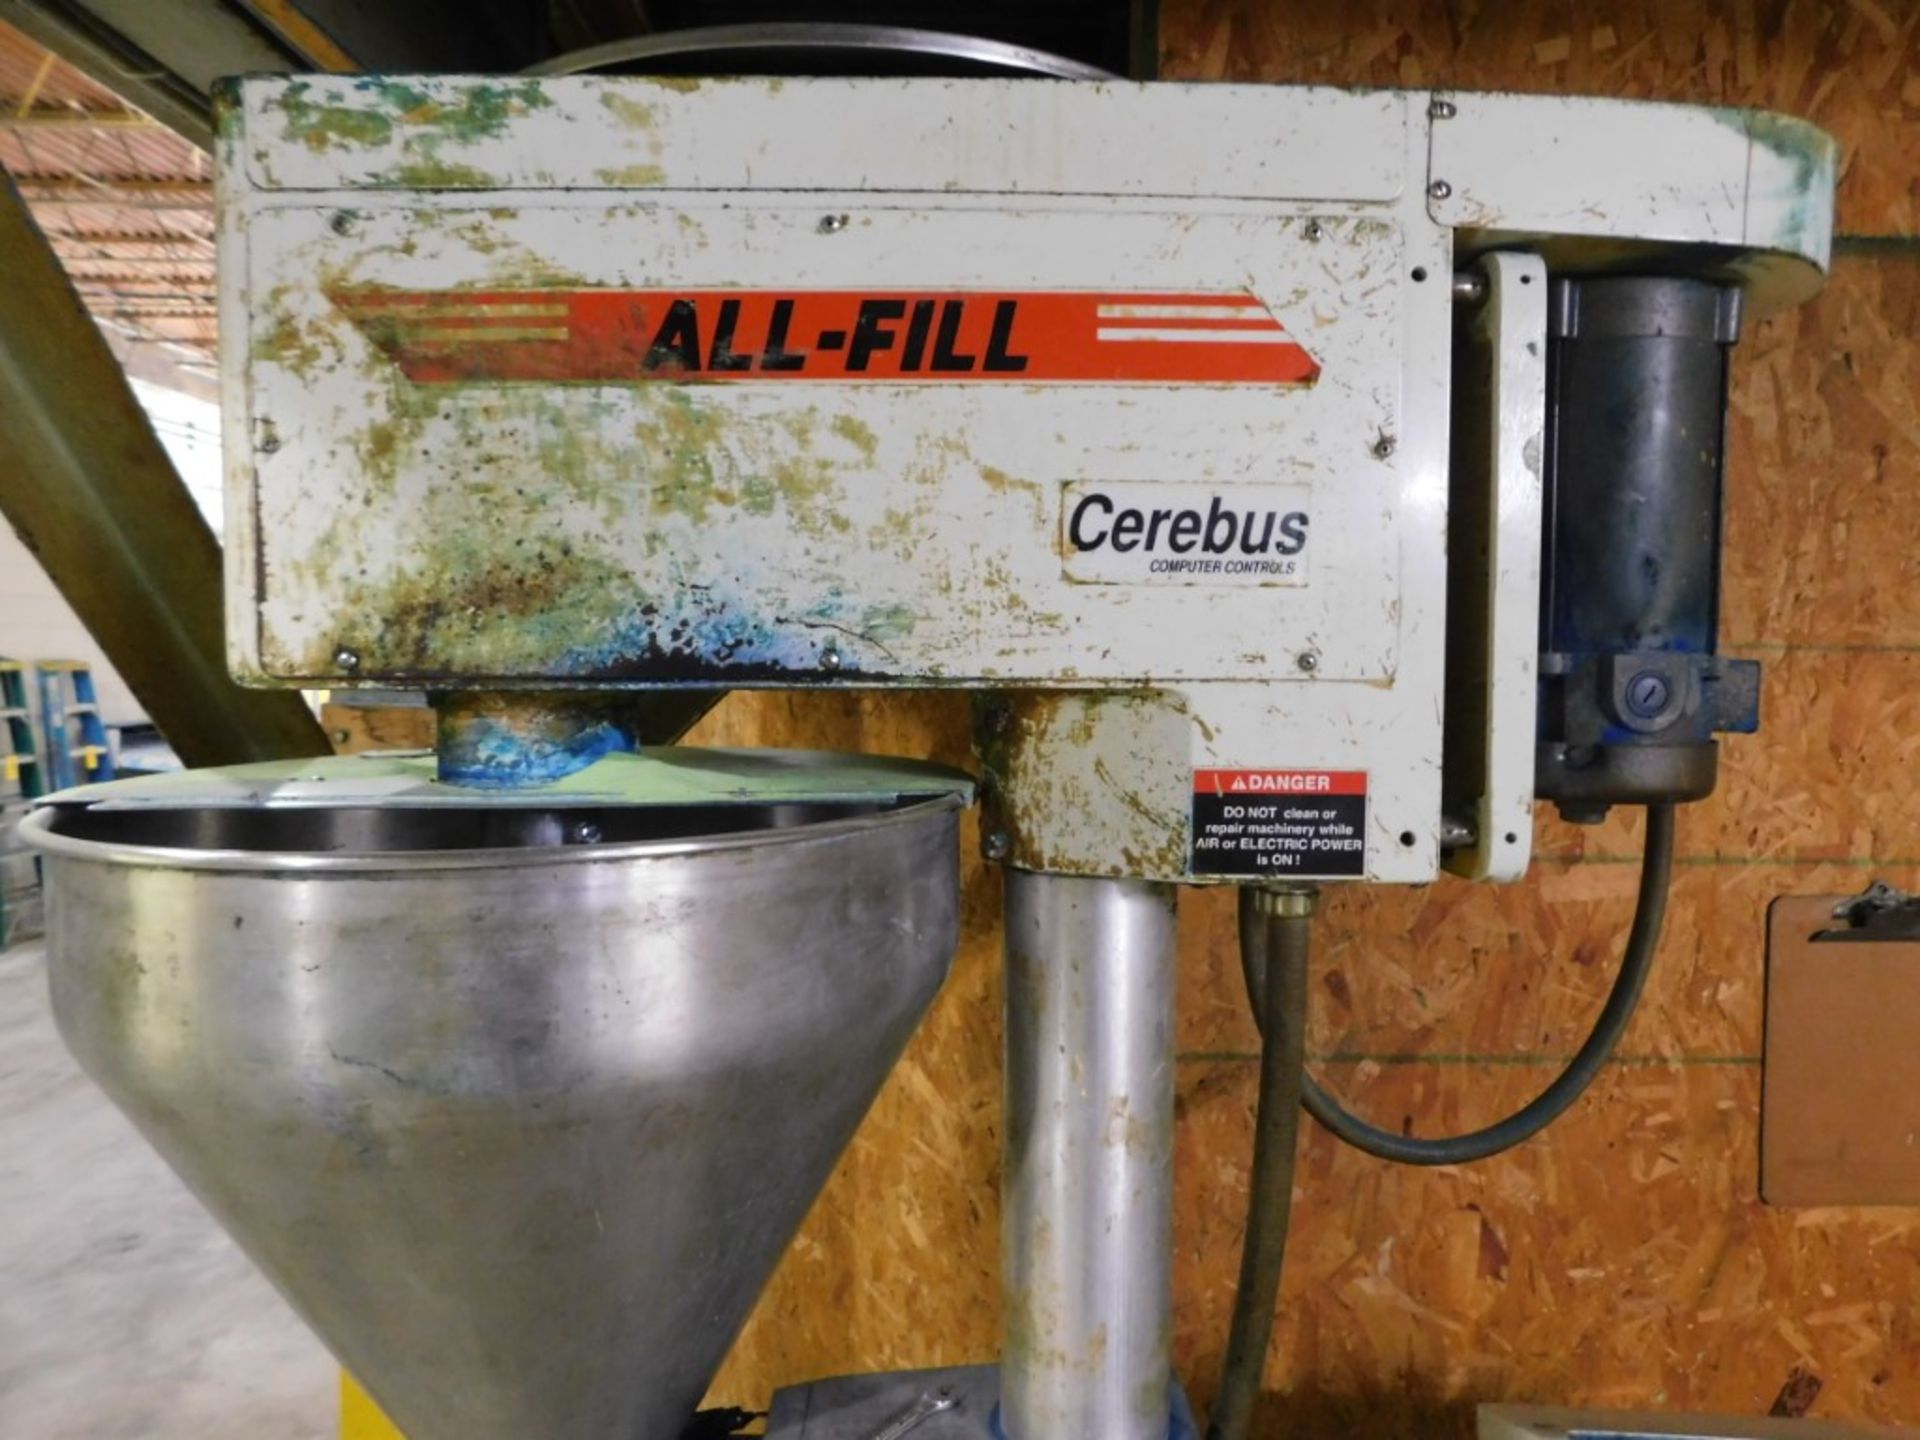 All-Fill Model B400 Filler, s/n 23011, with Cerebus III Computer Control, Loading Fee $50.00 - Image 3 of 6